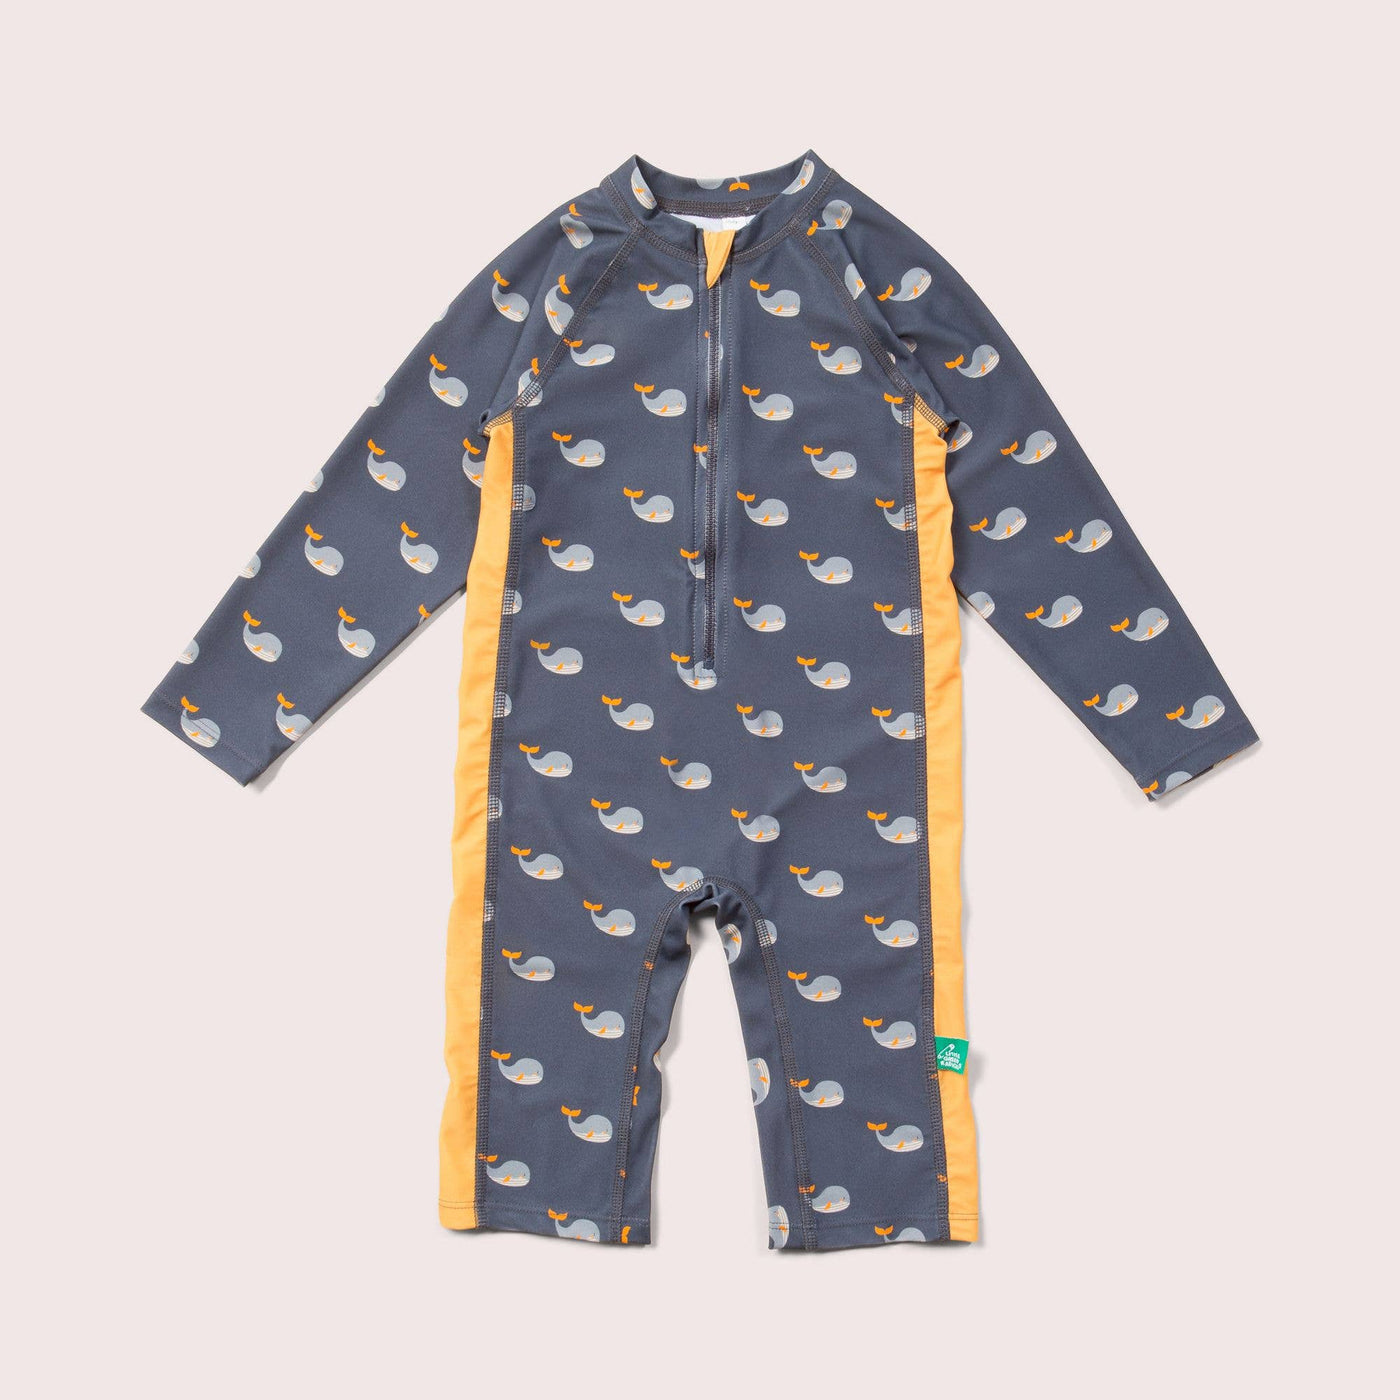 Little Green Radicals - Whale Song UVP 50+ Recycled Sunsafe Sunsuit - kennethodaniel